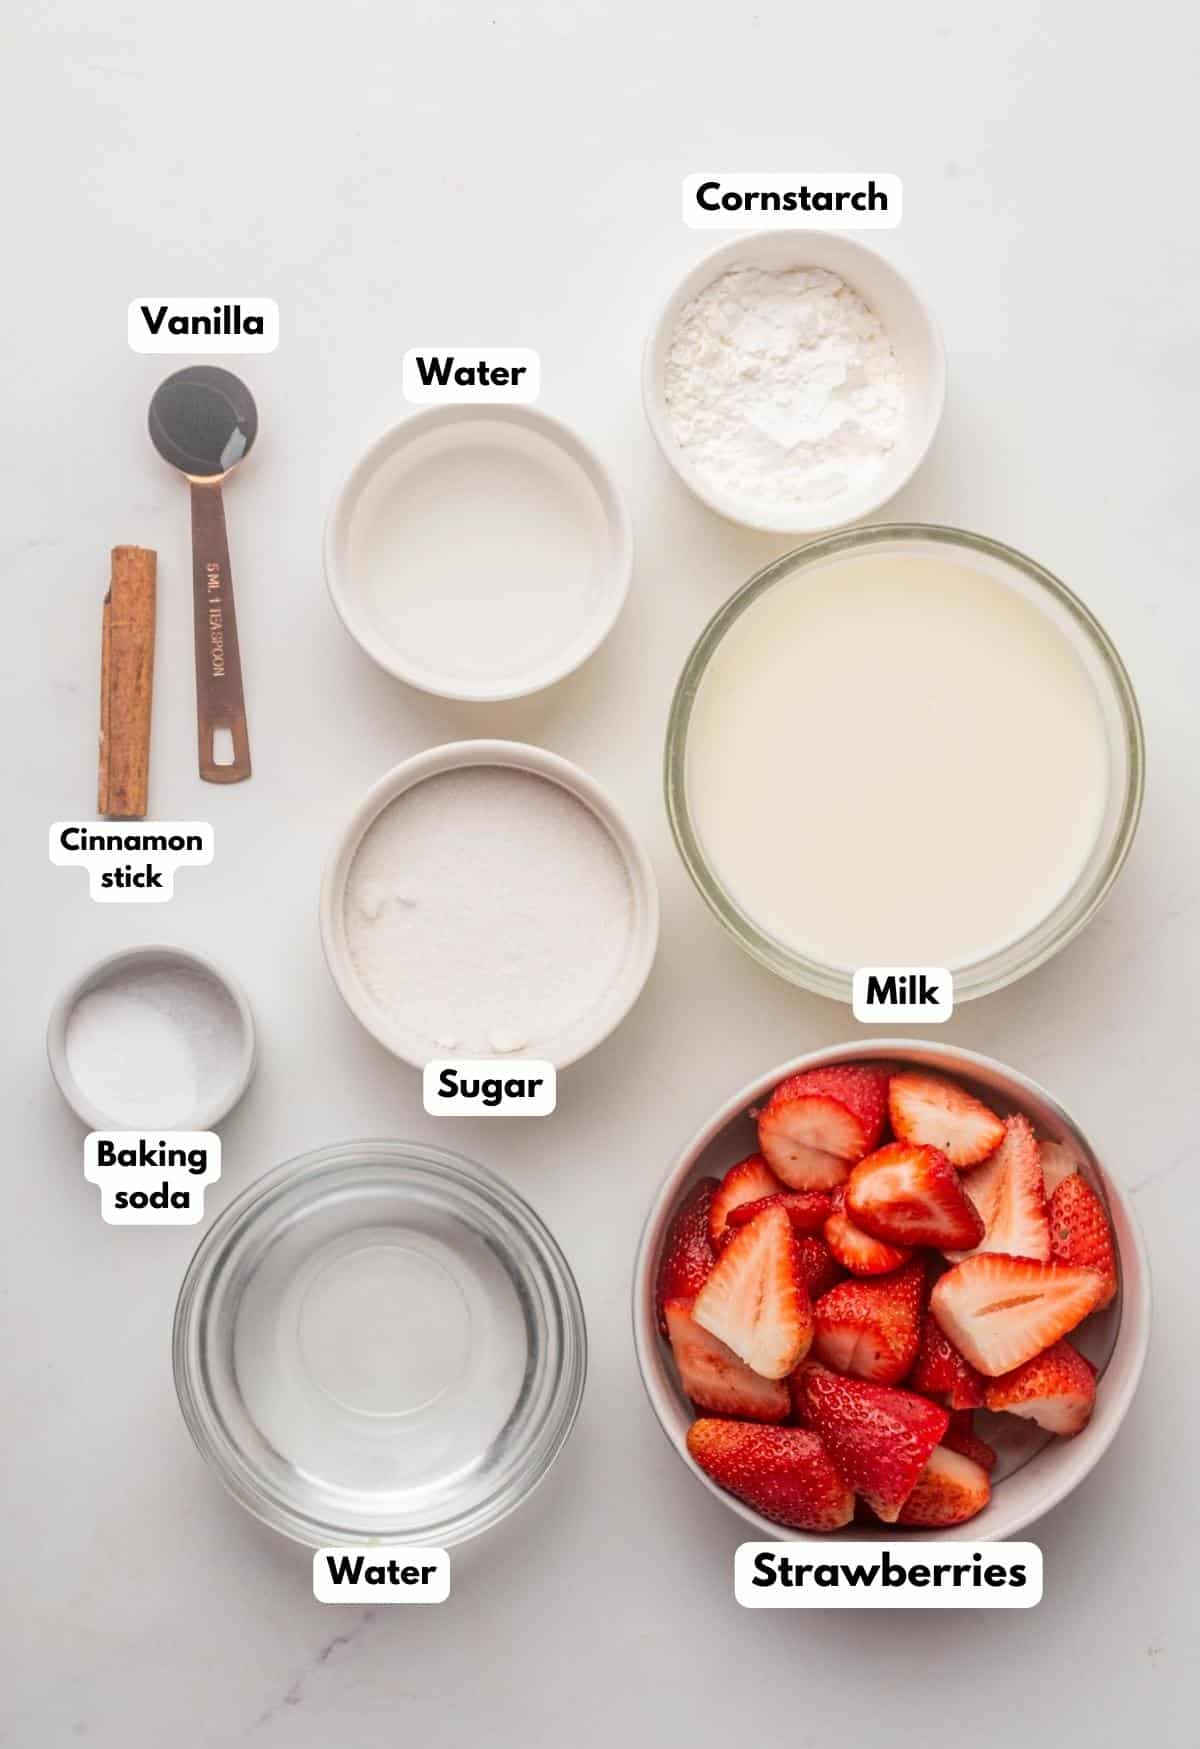 The ingredients needed to make the strawberry drink.